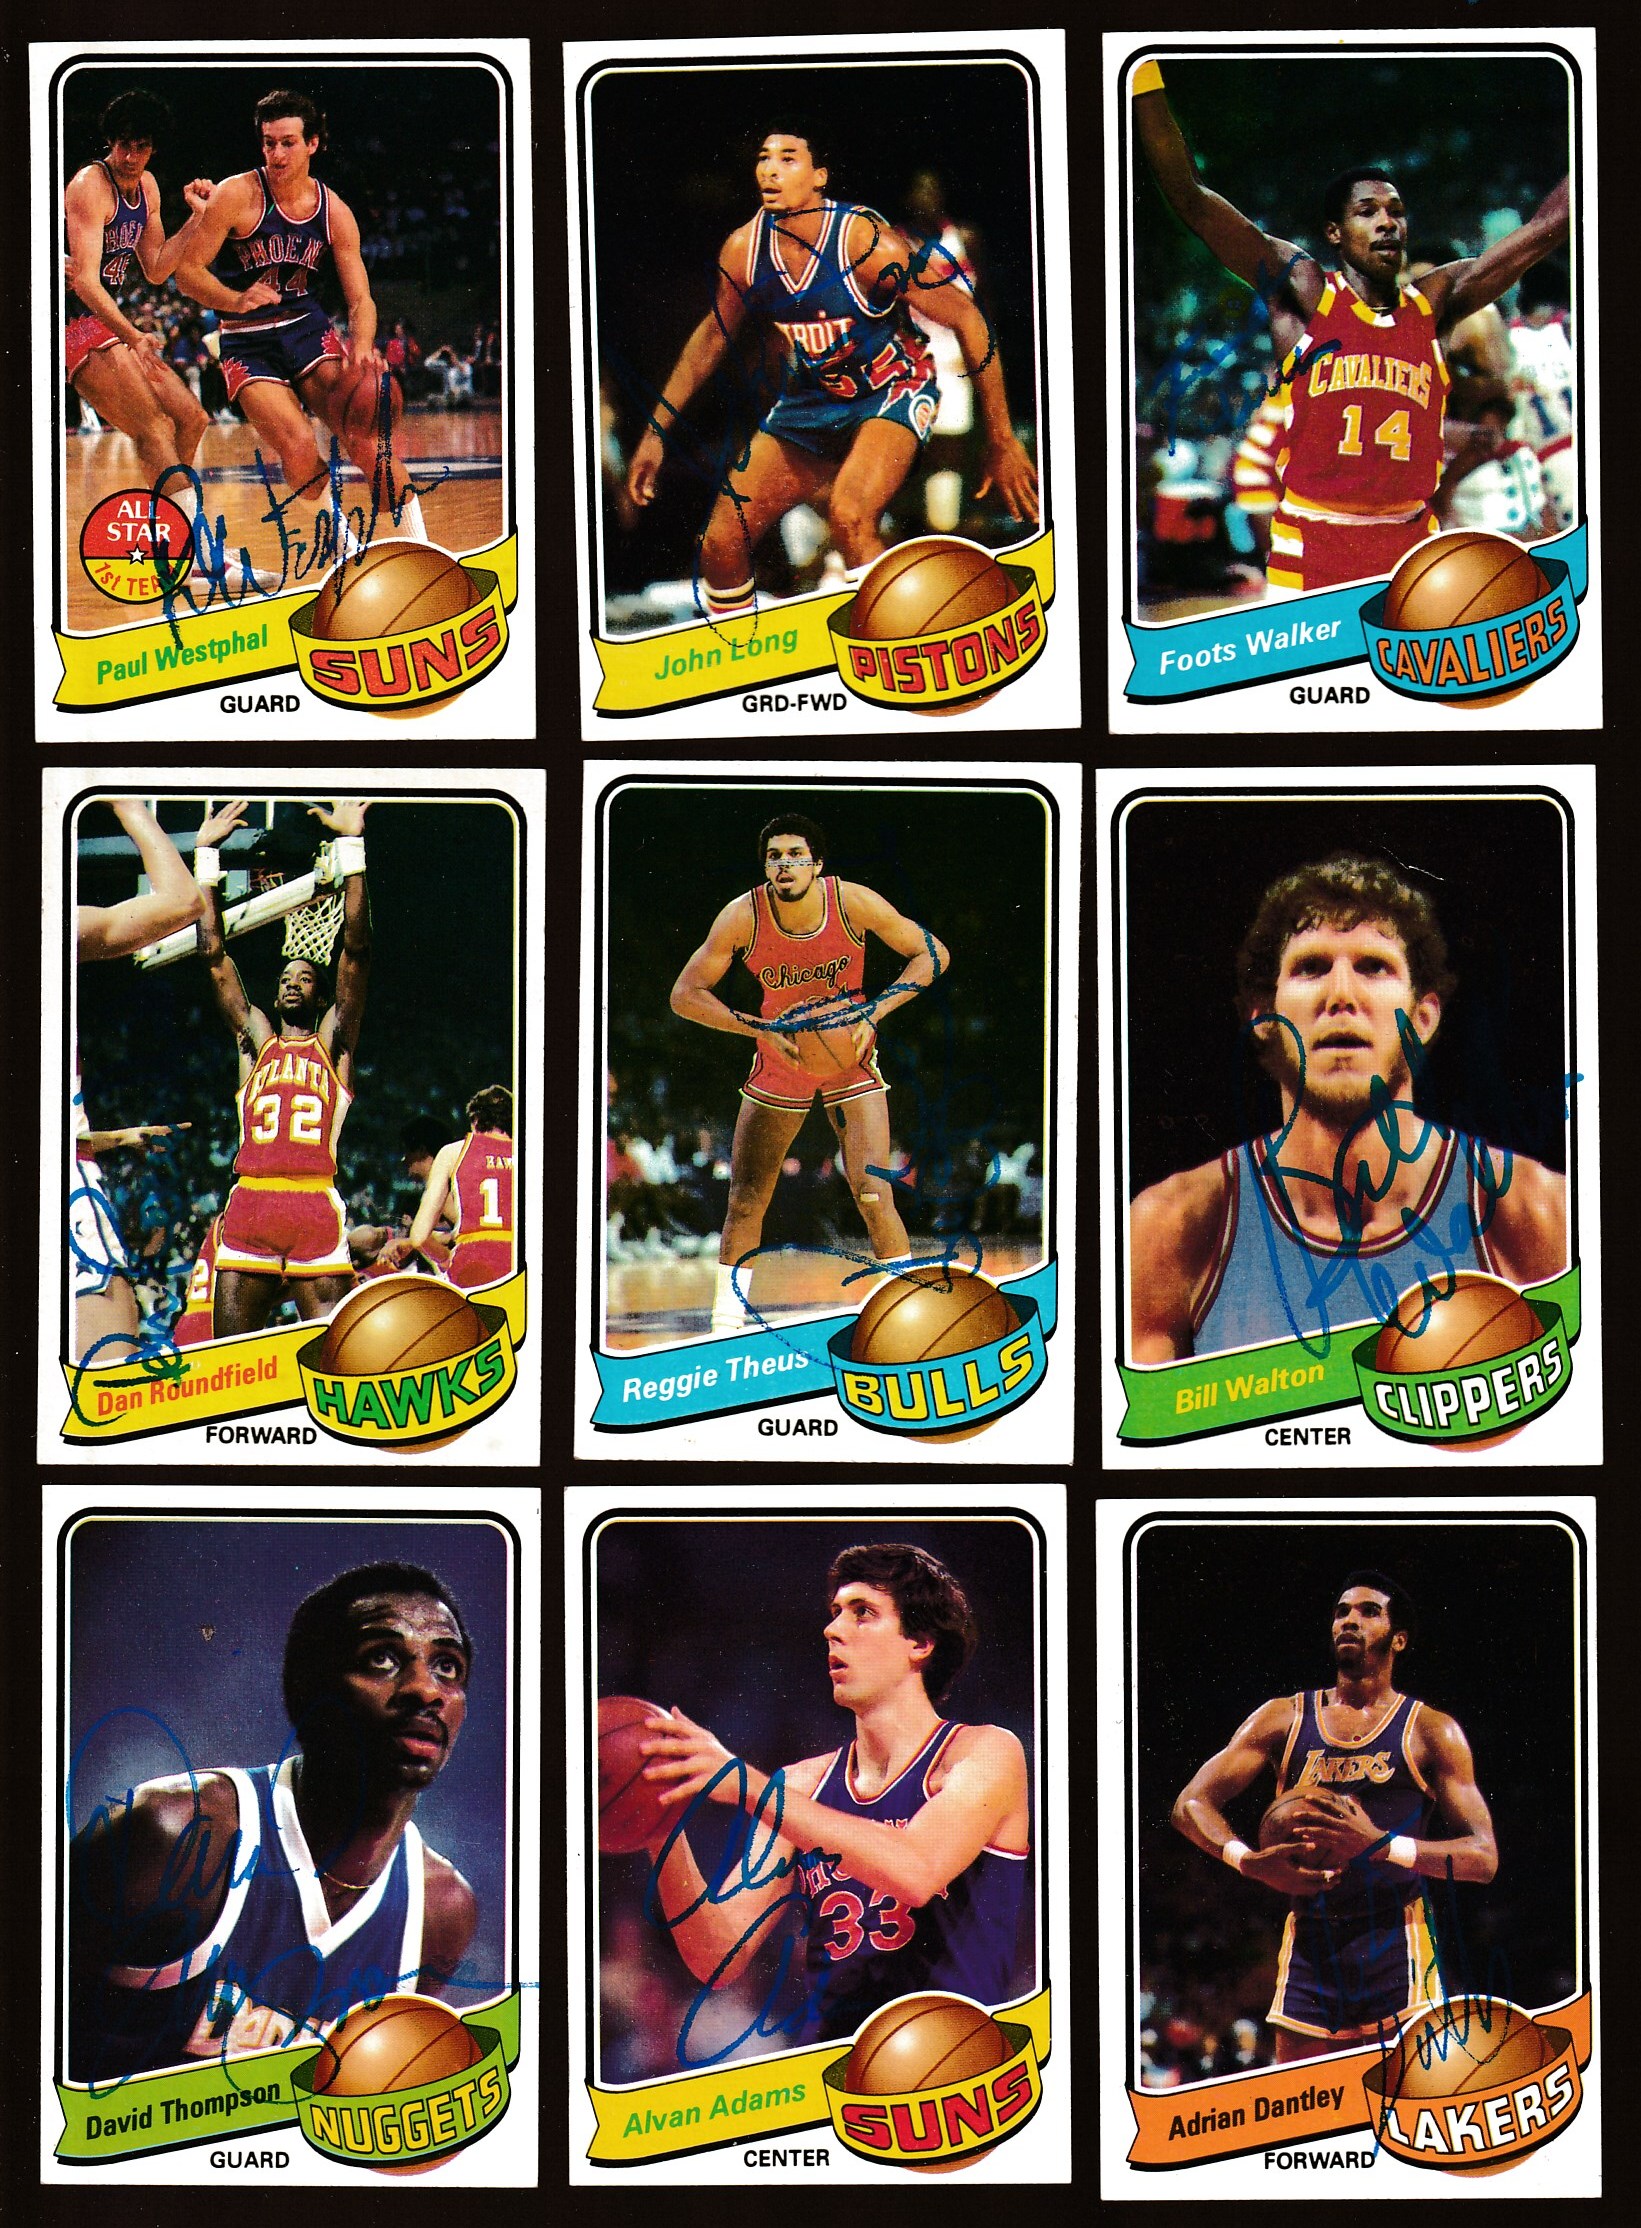 1979-80 Topps Basketball # 38 John Long ROOKIE AUTOGRAPHED (Pistons) Basketball cards value